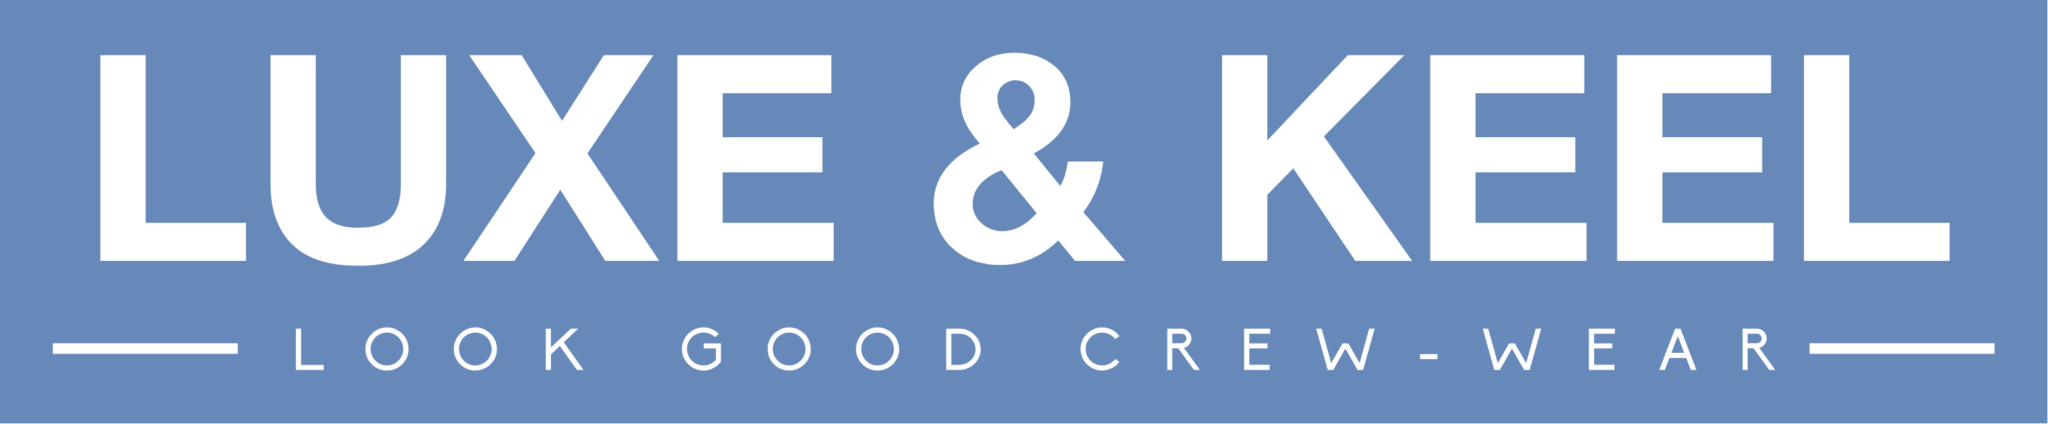 Luxe and Keel logo blue